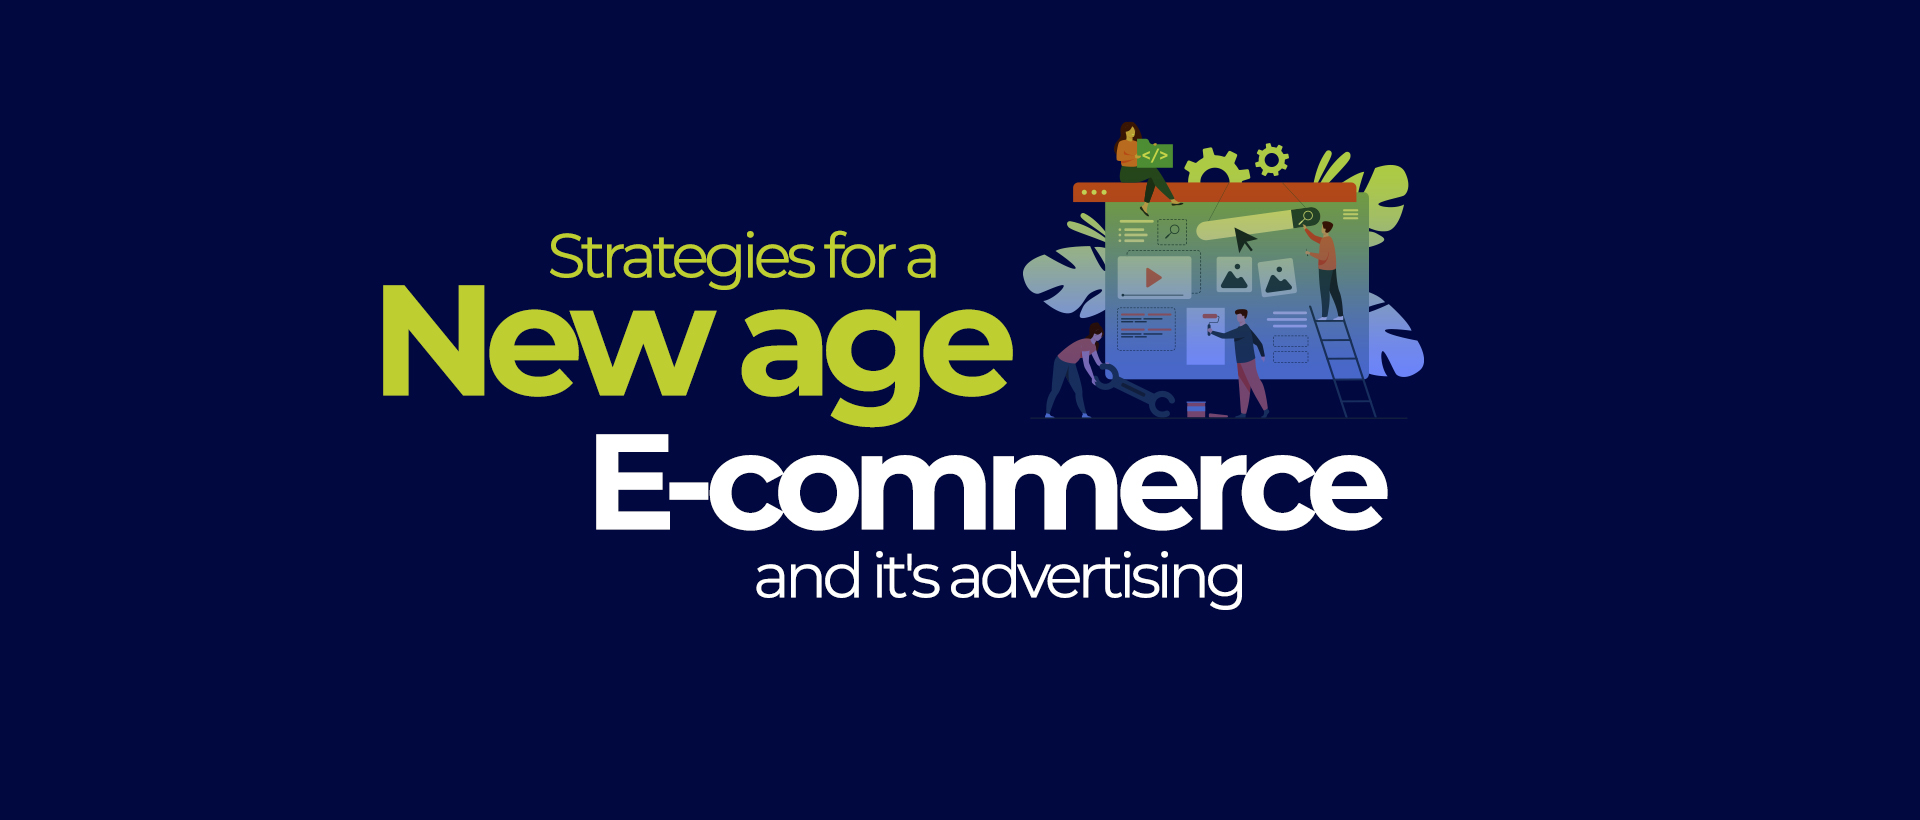 Strategies for a new age: e-commerce and it's advertising